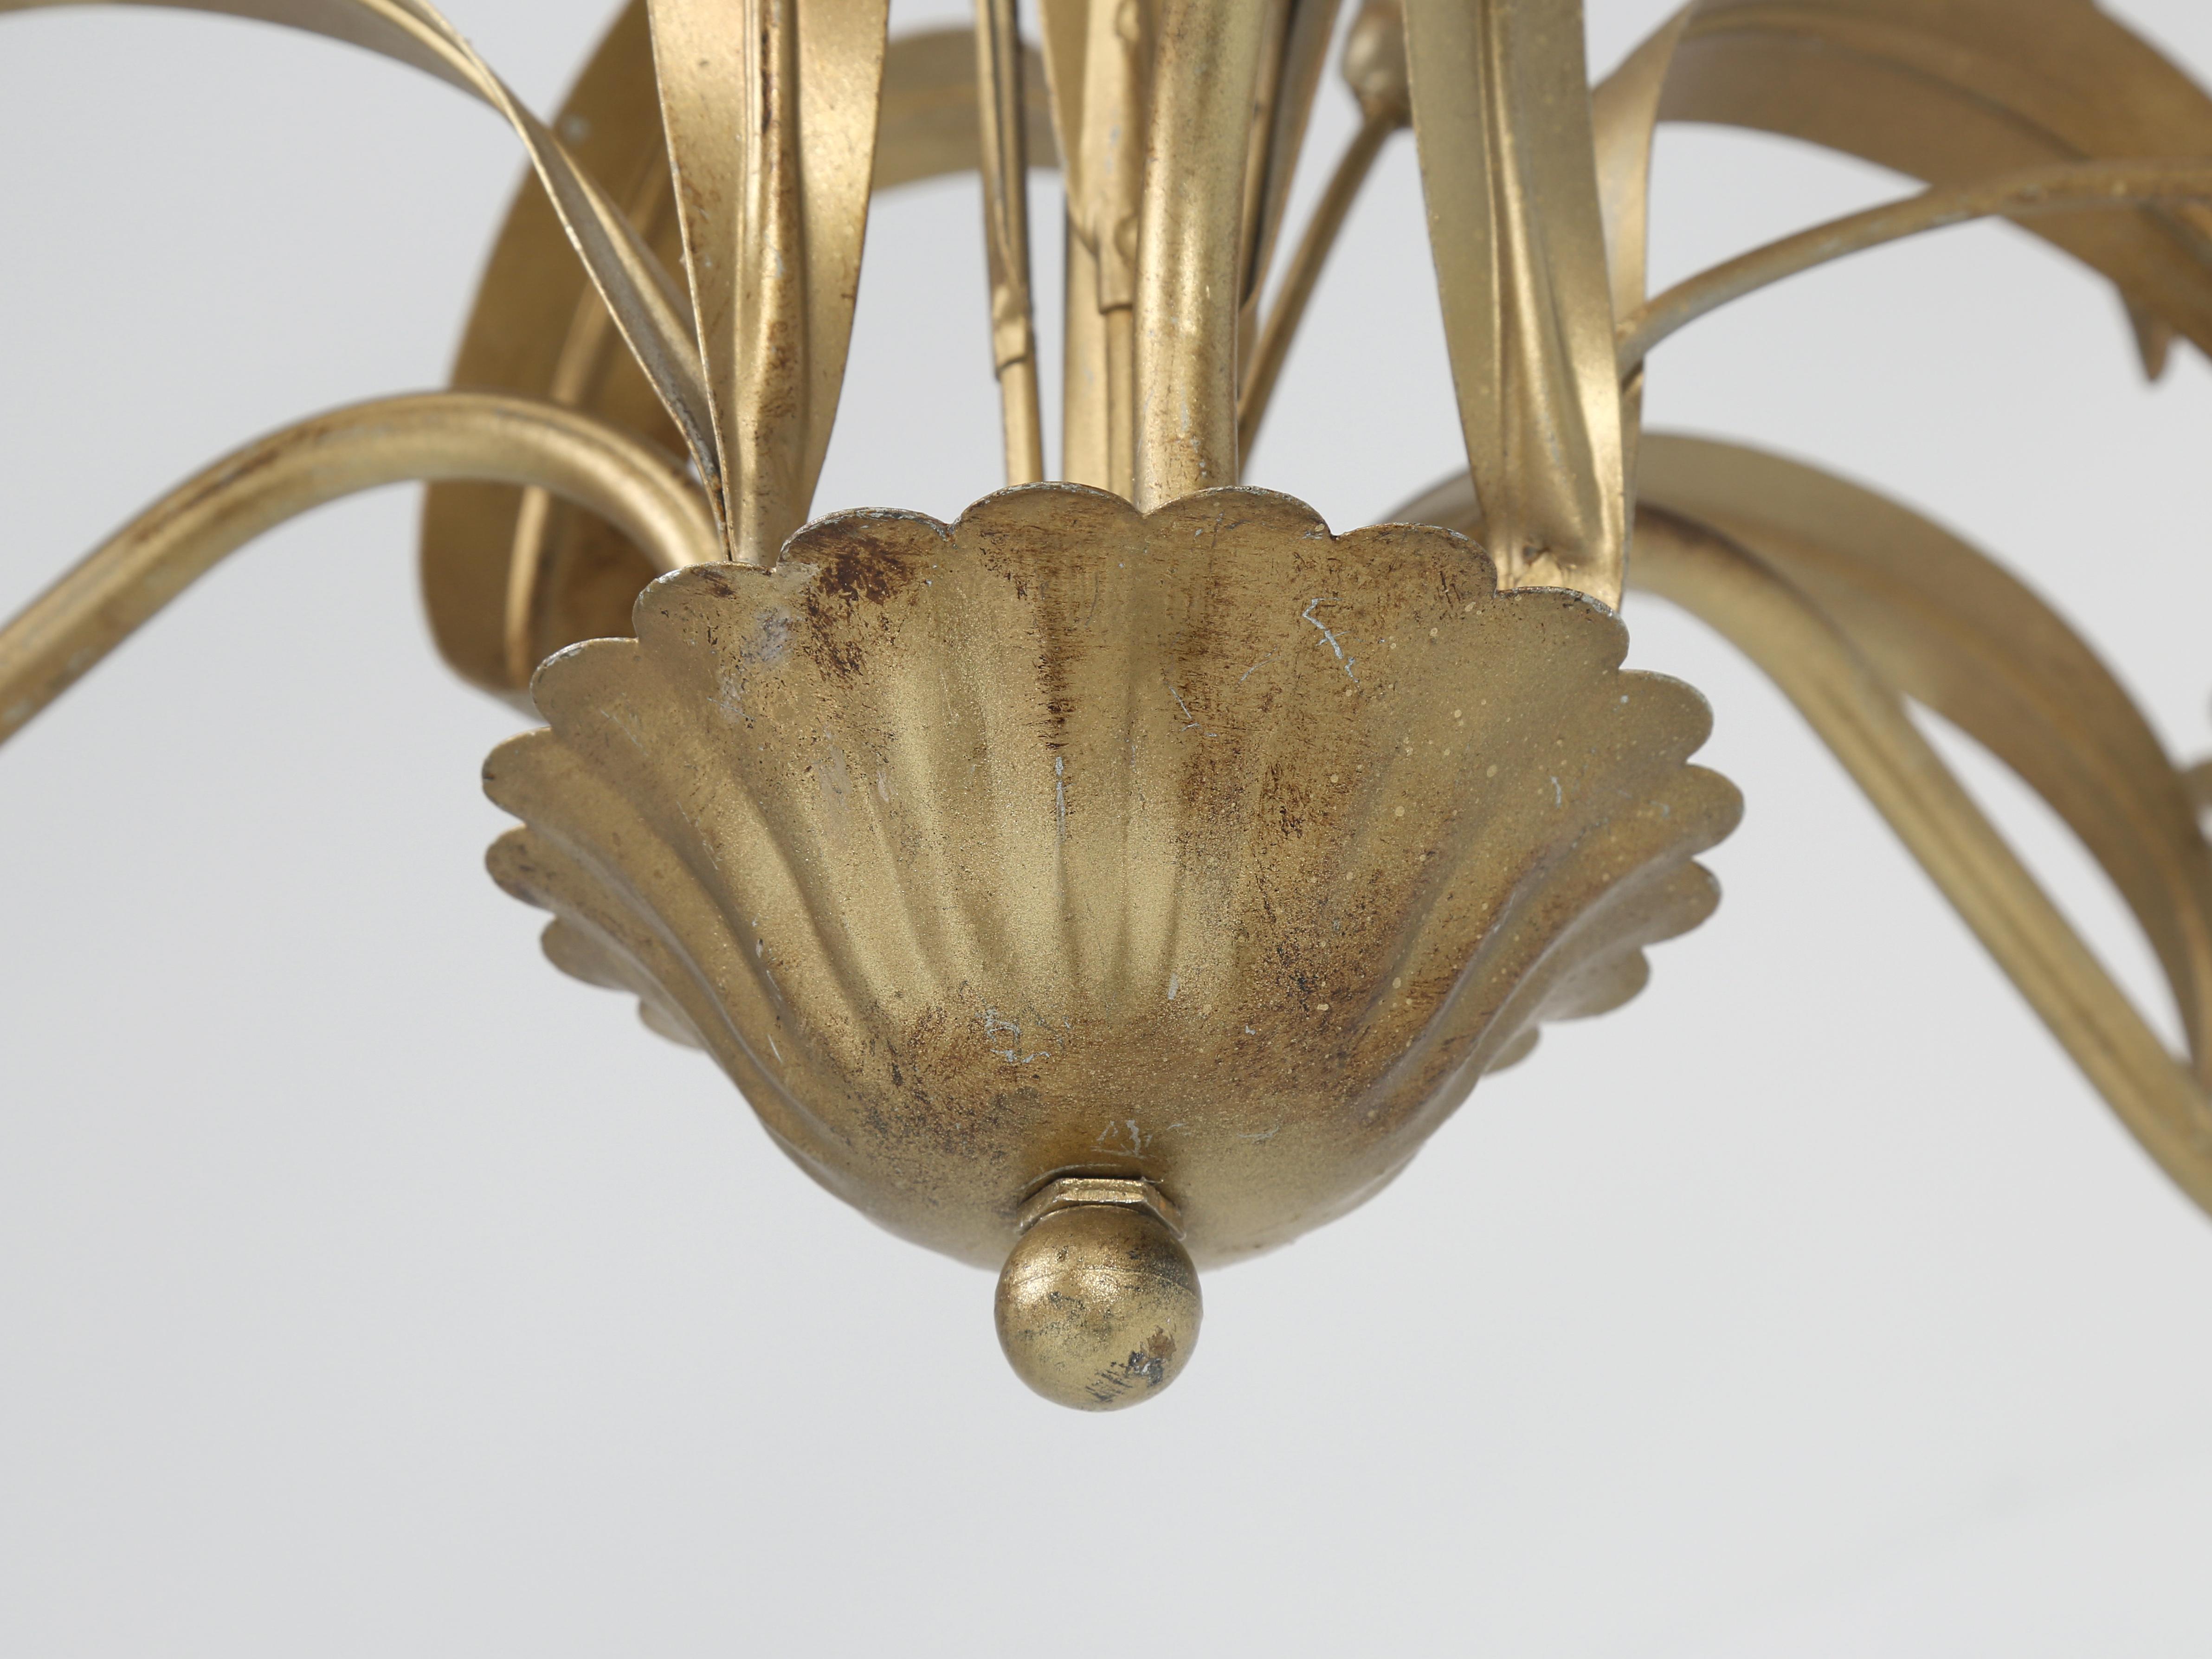 Pair of Italian Midcentury Coco Chanel Style Chandeliers C 1960s in Old Gilding For Sale 5